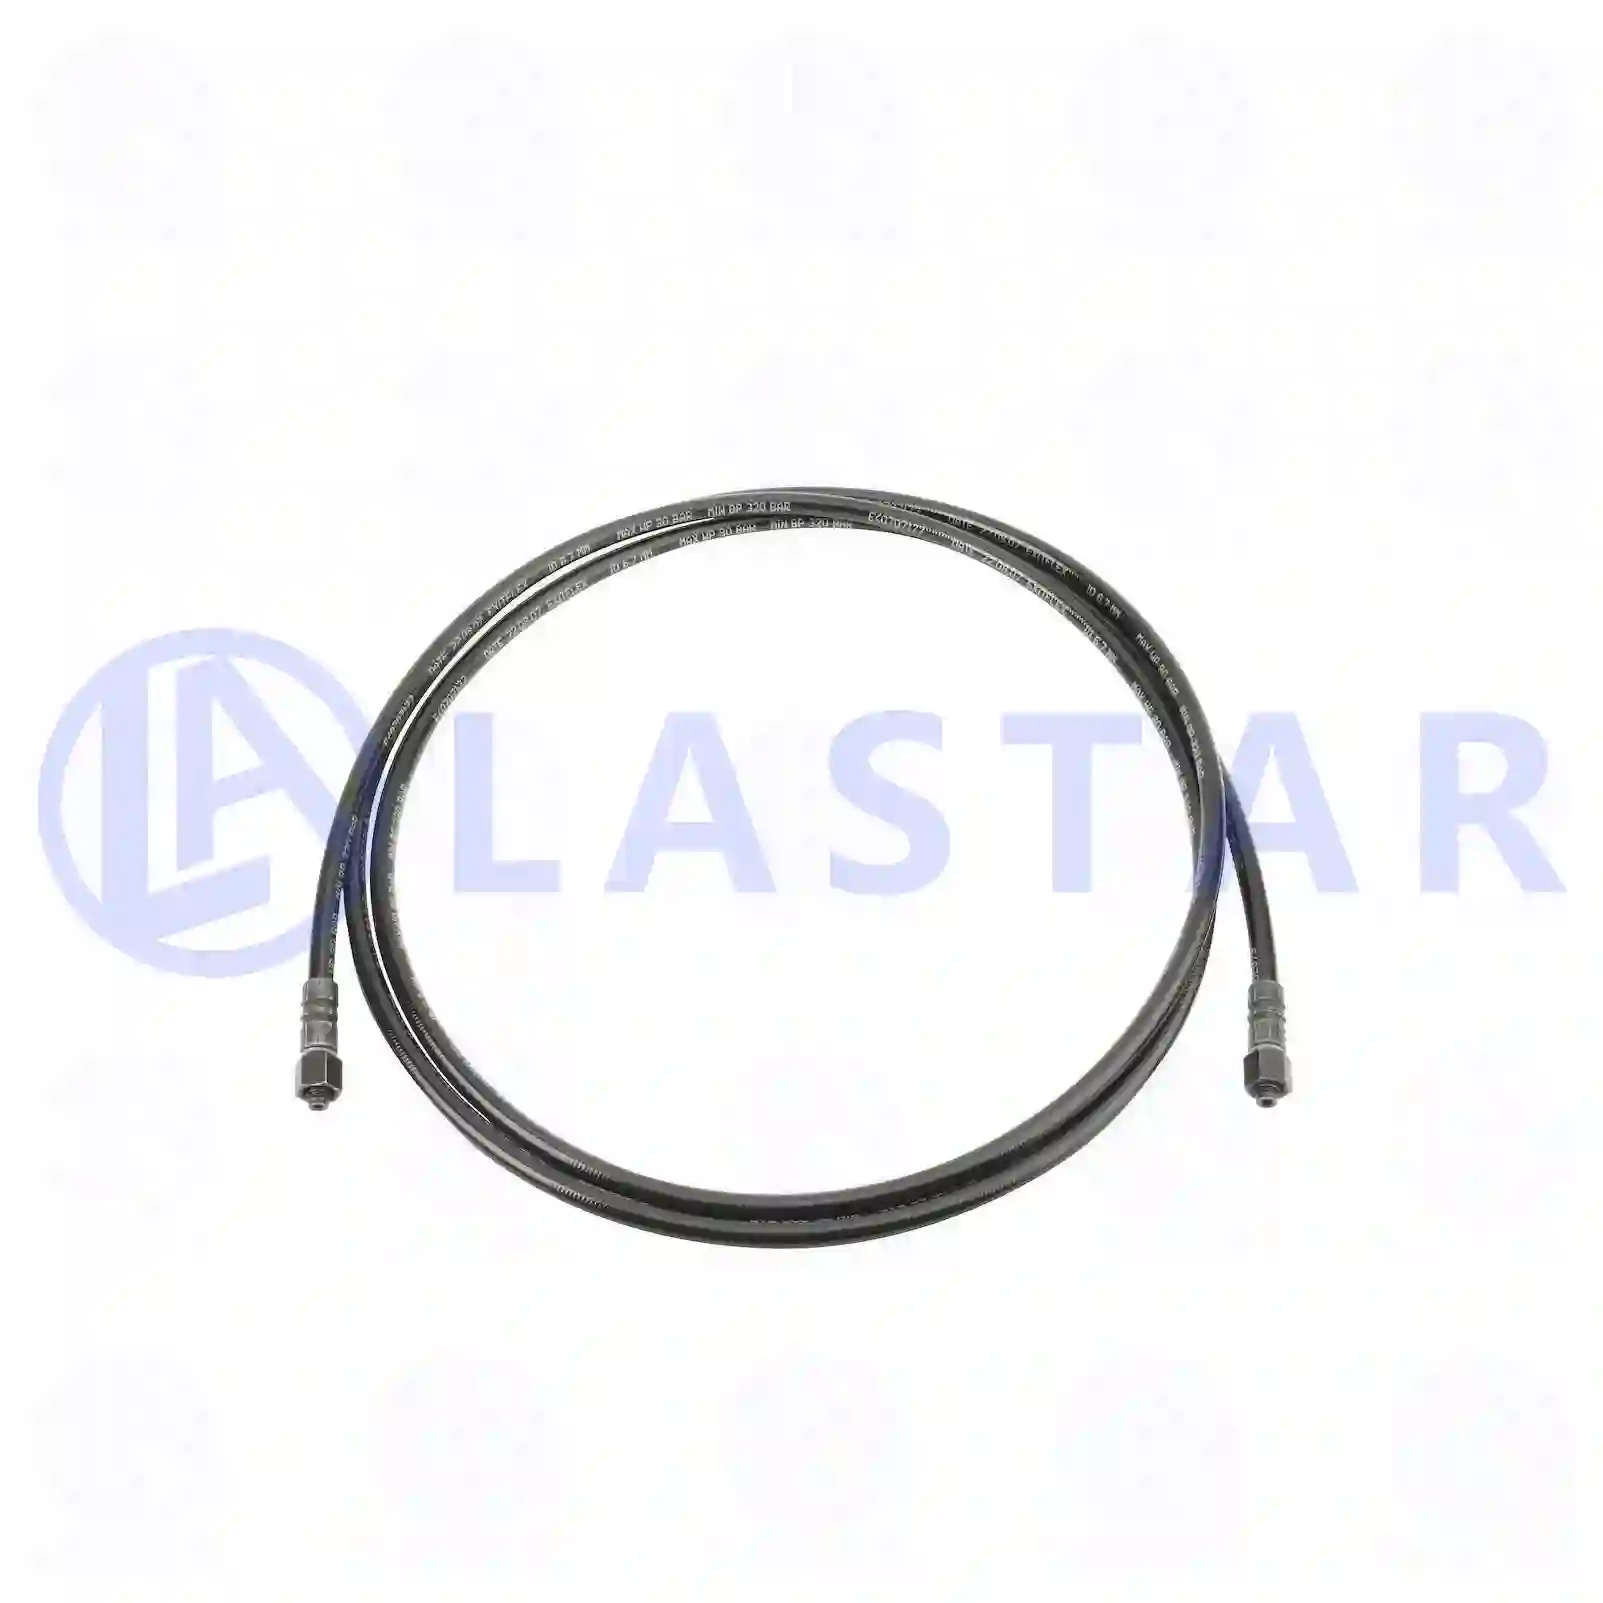 Hydraulic hose, 77722227, 980164, 981559 ||  77722227 Lastar Spare Part | Truck Spare Parts, Auotomotive Spare Parts Hydraulic hose, 77722227, 980164, 981559 ||  77722227 Lastar Spare Part | Truck Spare Parts, Auotomotive Spare Parts